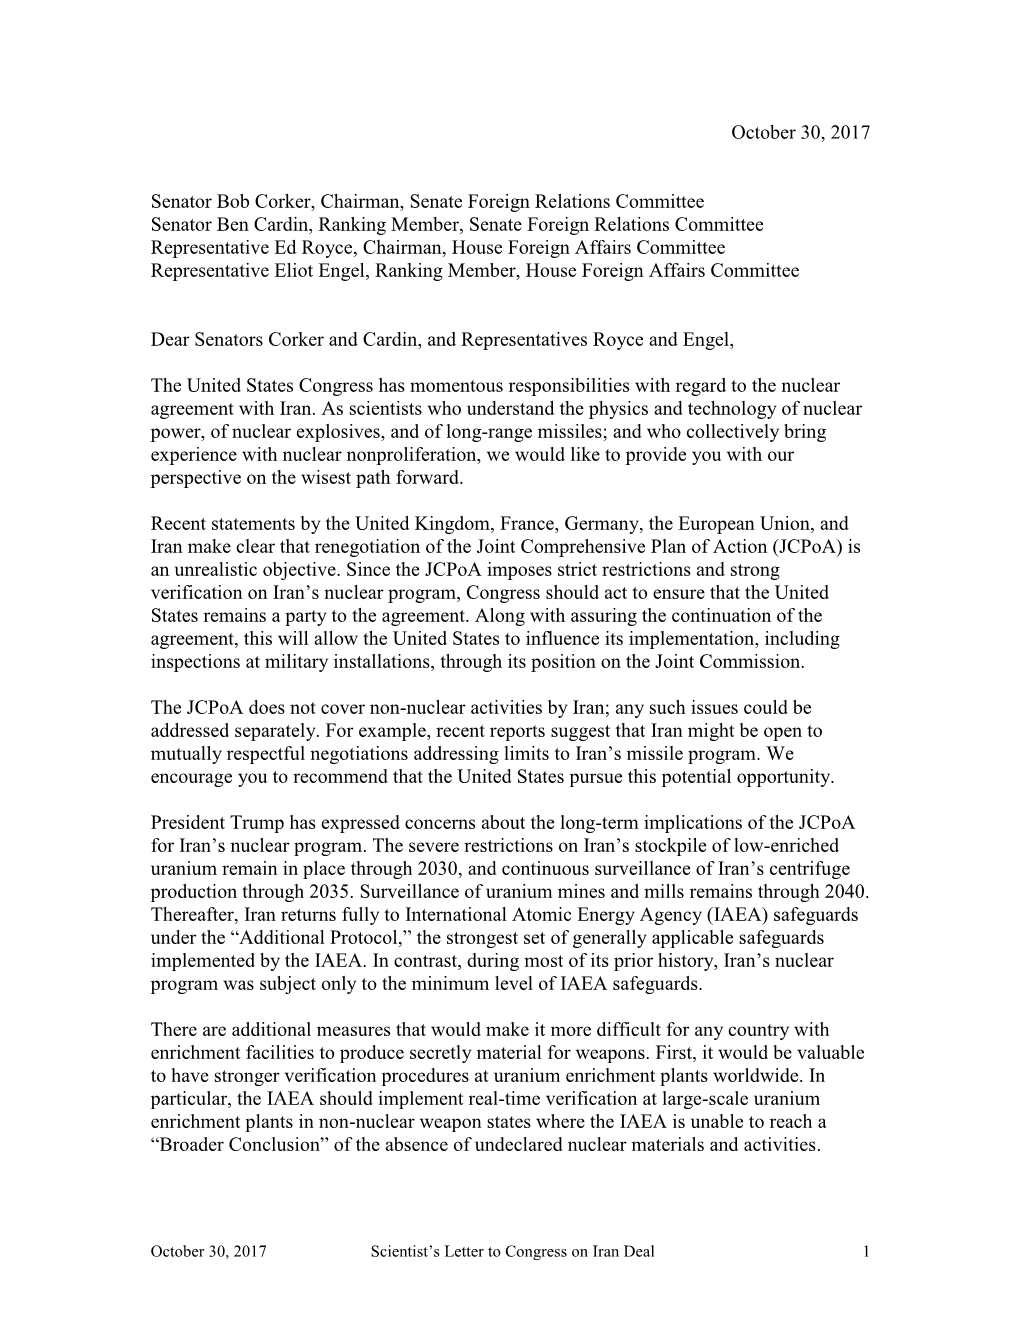 Scientists' Letter to Congress on the Iran Deal